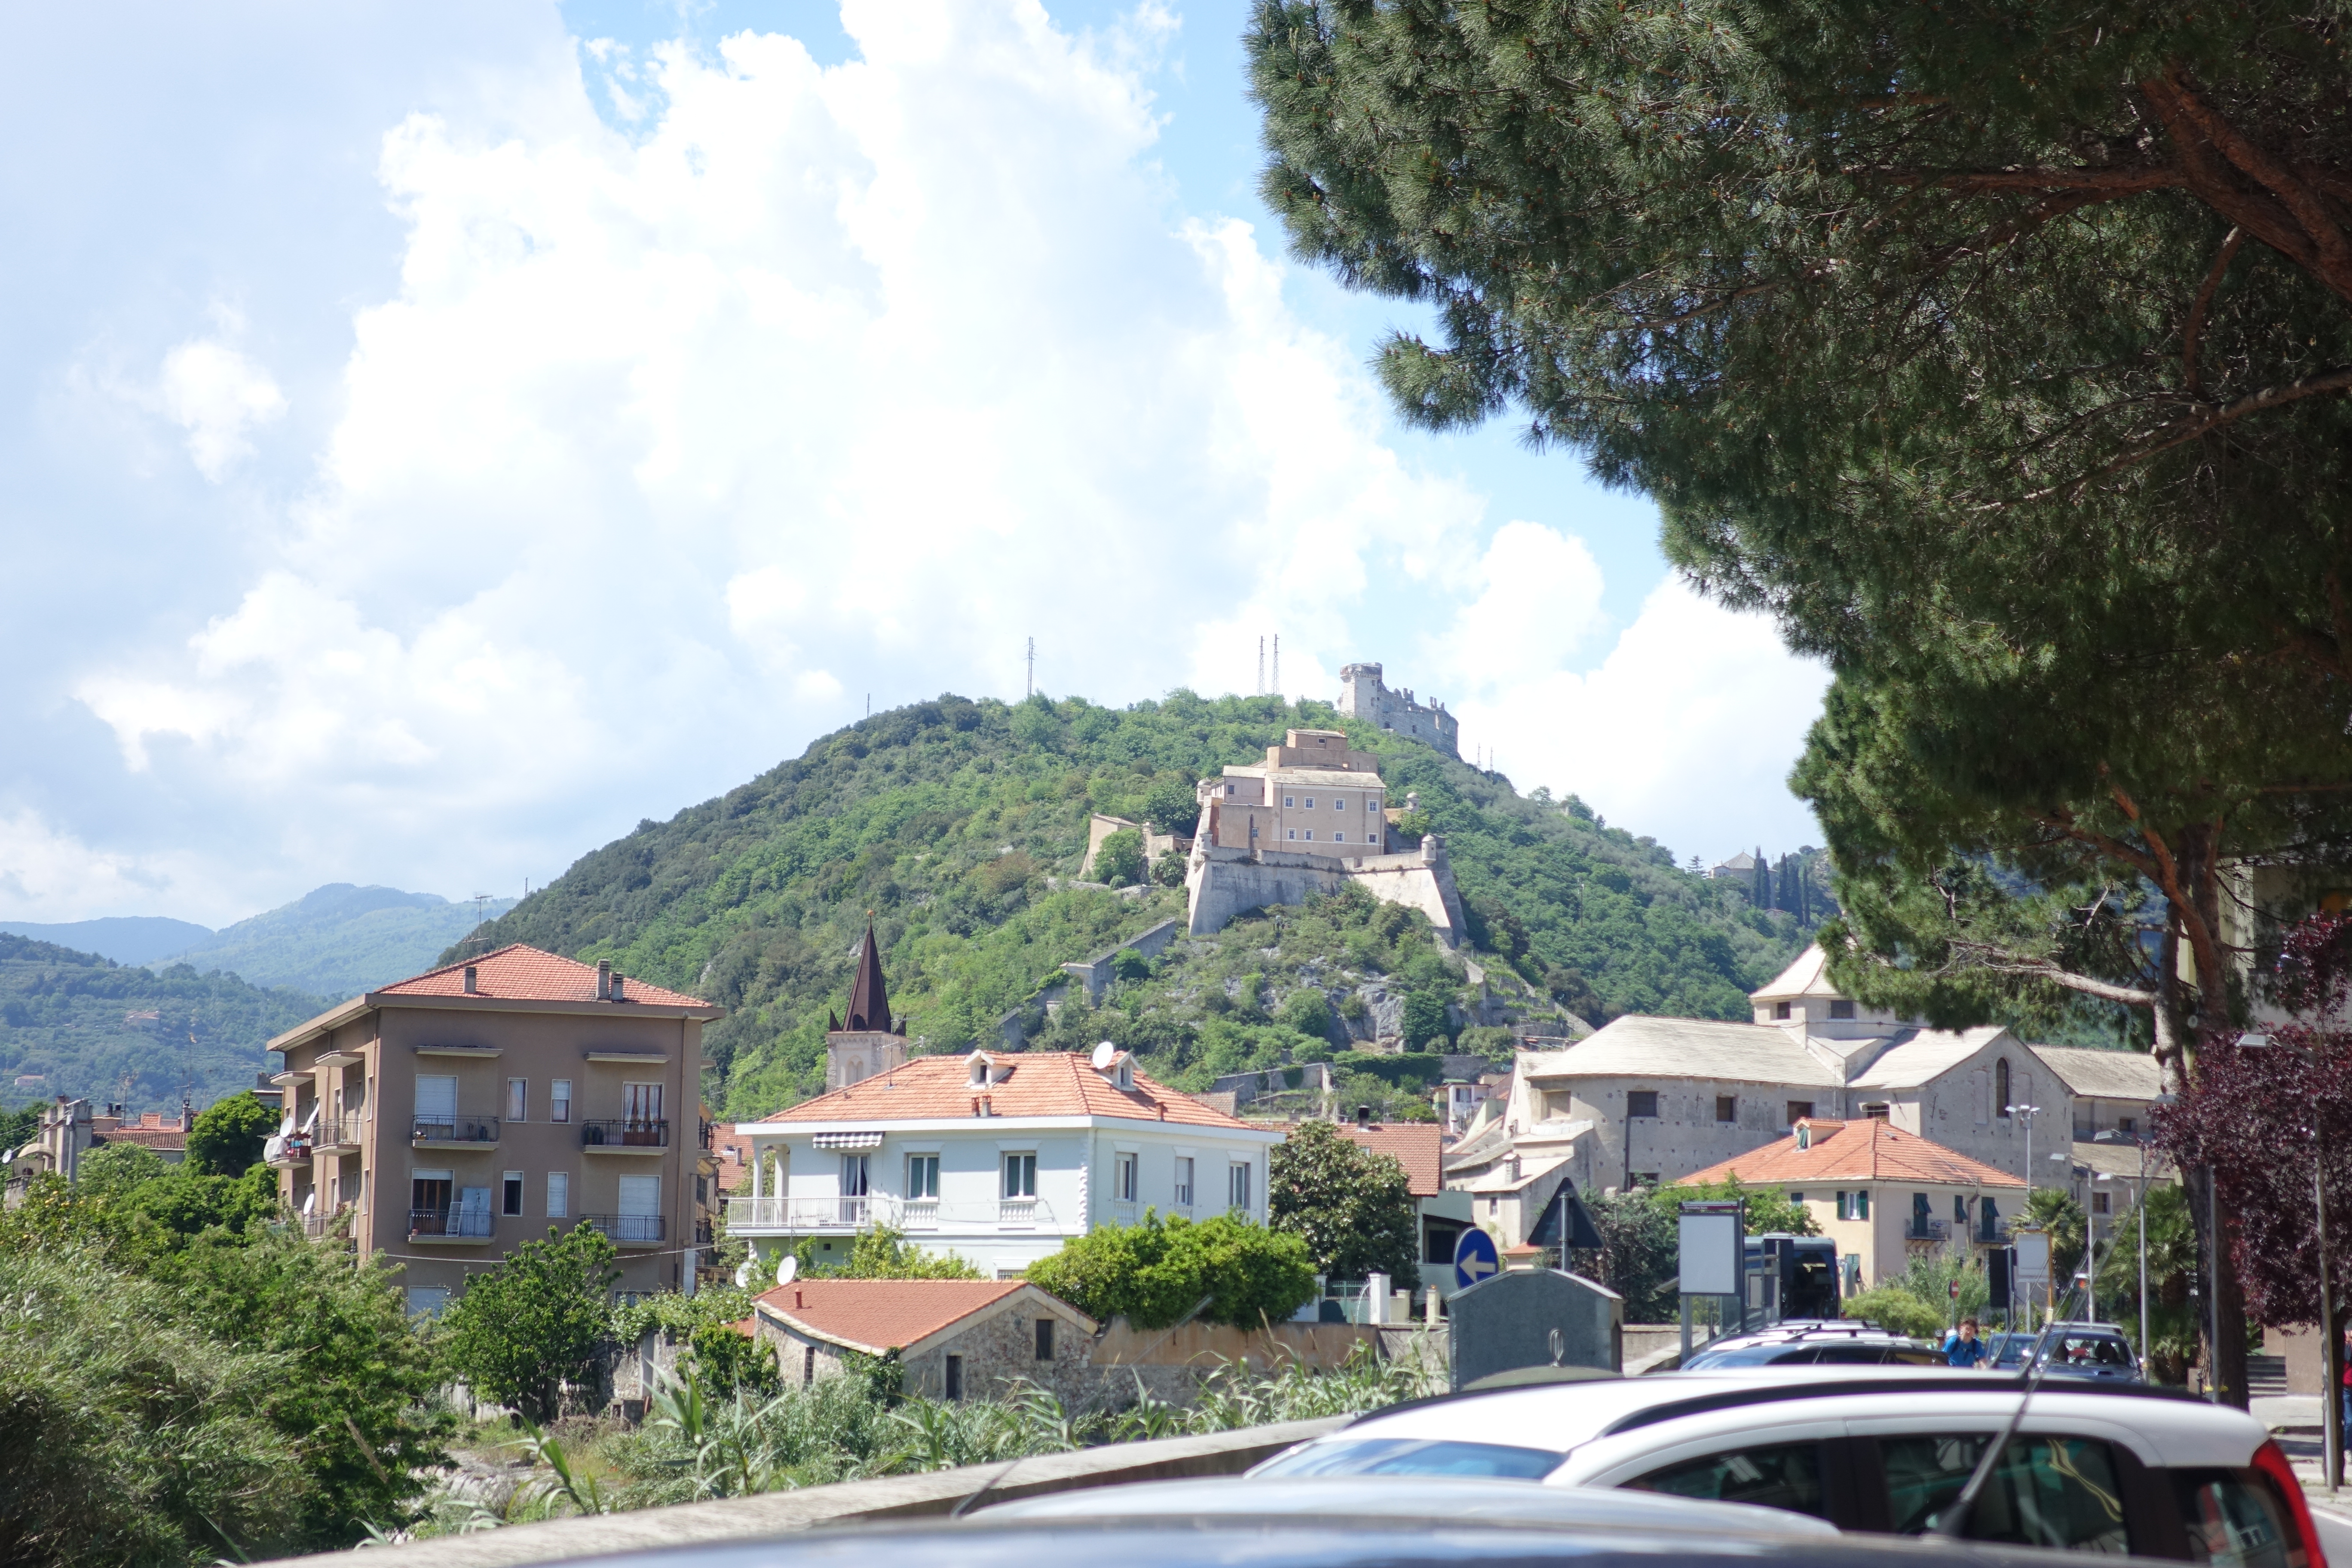 The two castles within the old portion of Finale Ligure